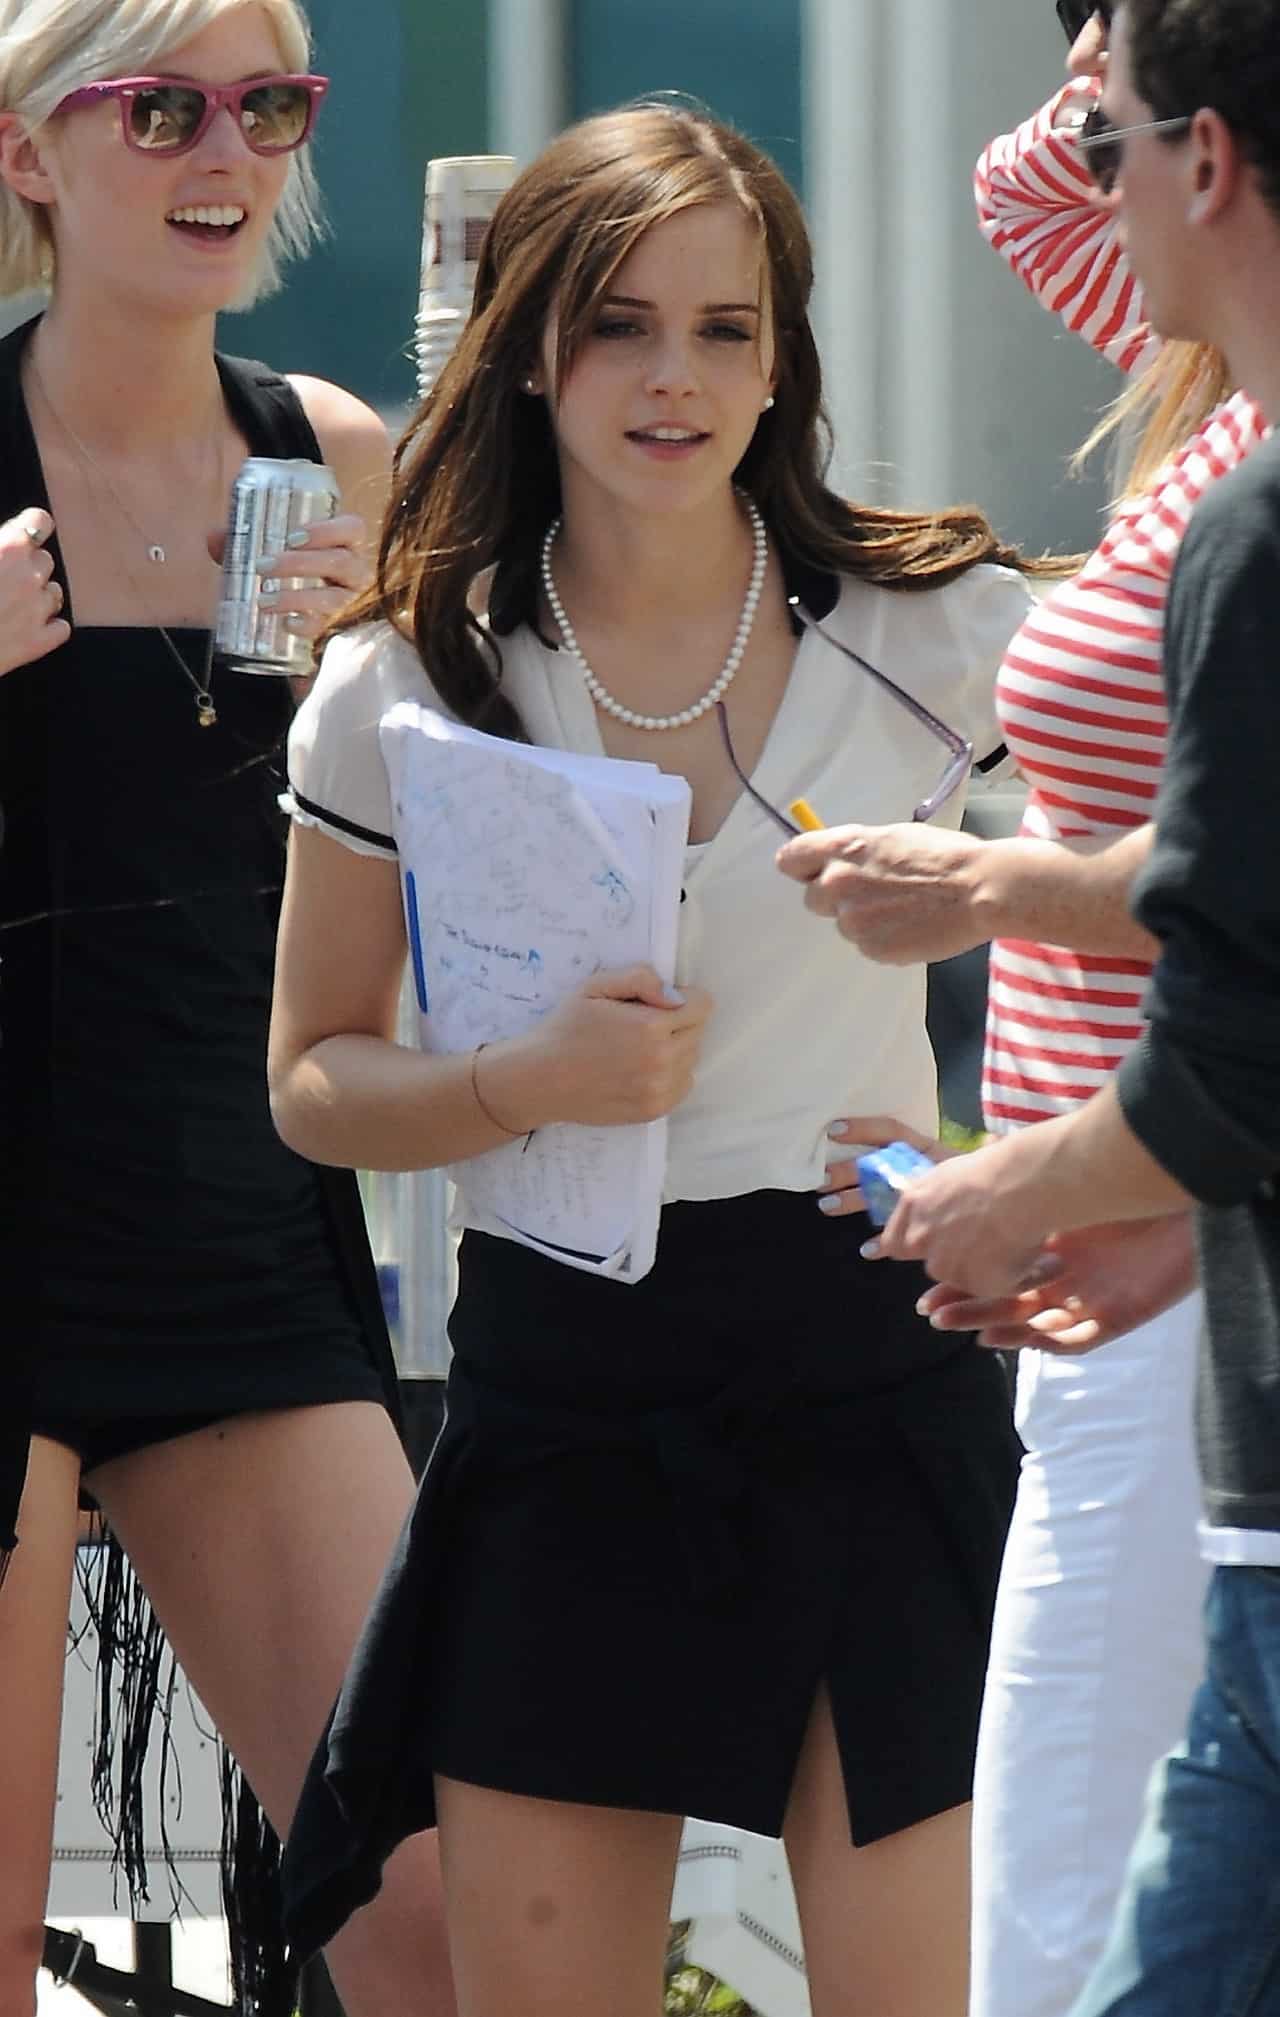 Emma Watson Catches Attention in a Business Outfit on "The Bling Ring" Set